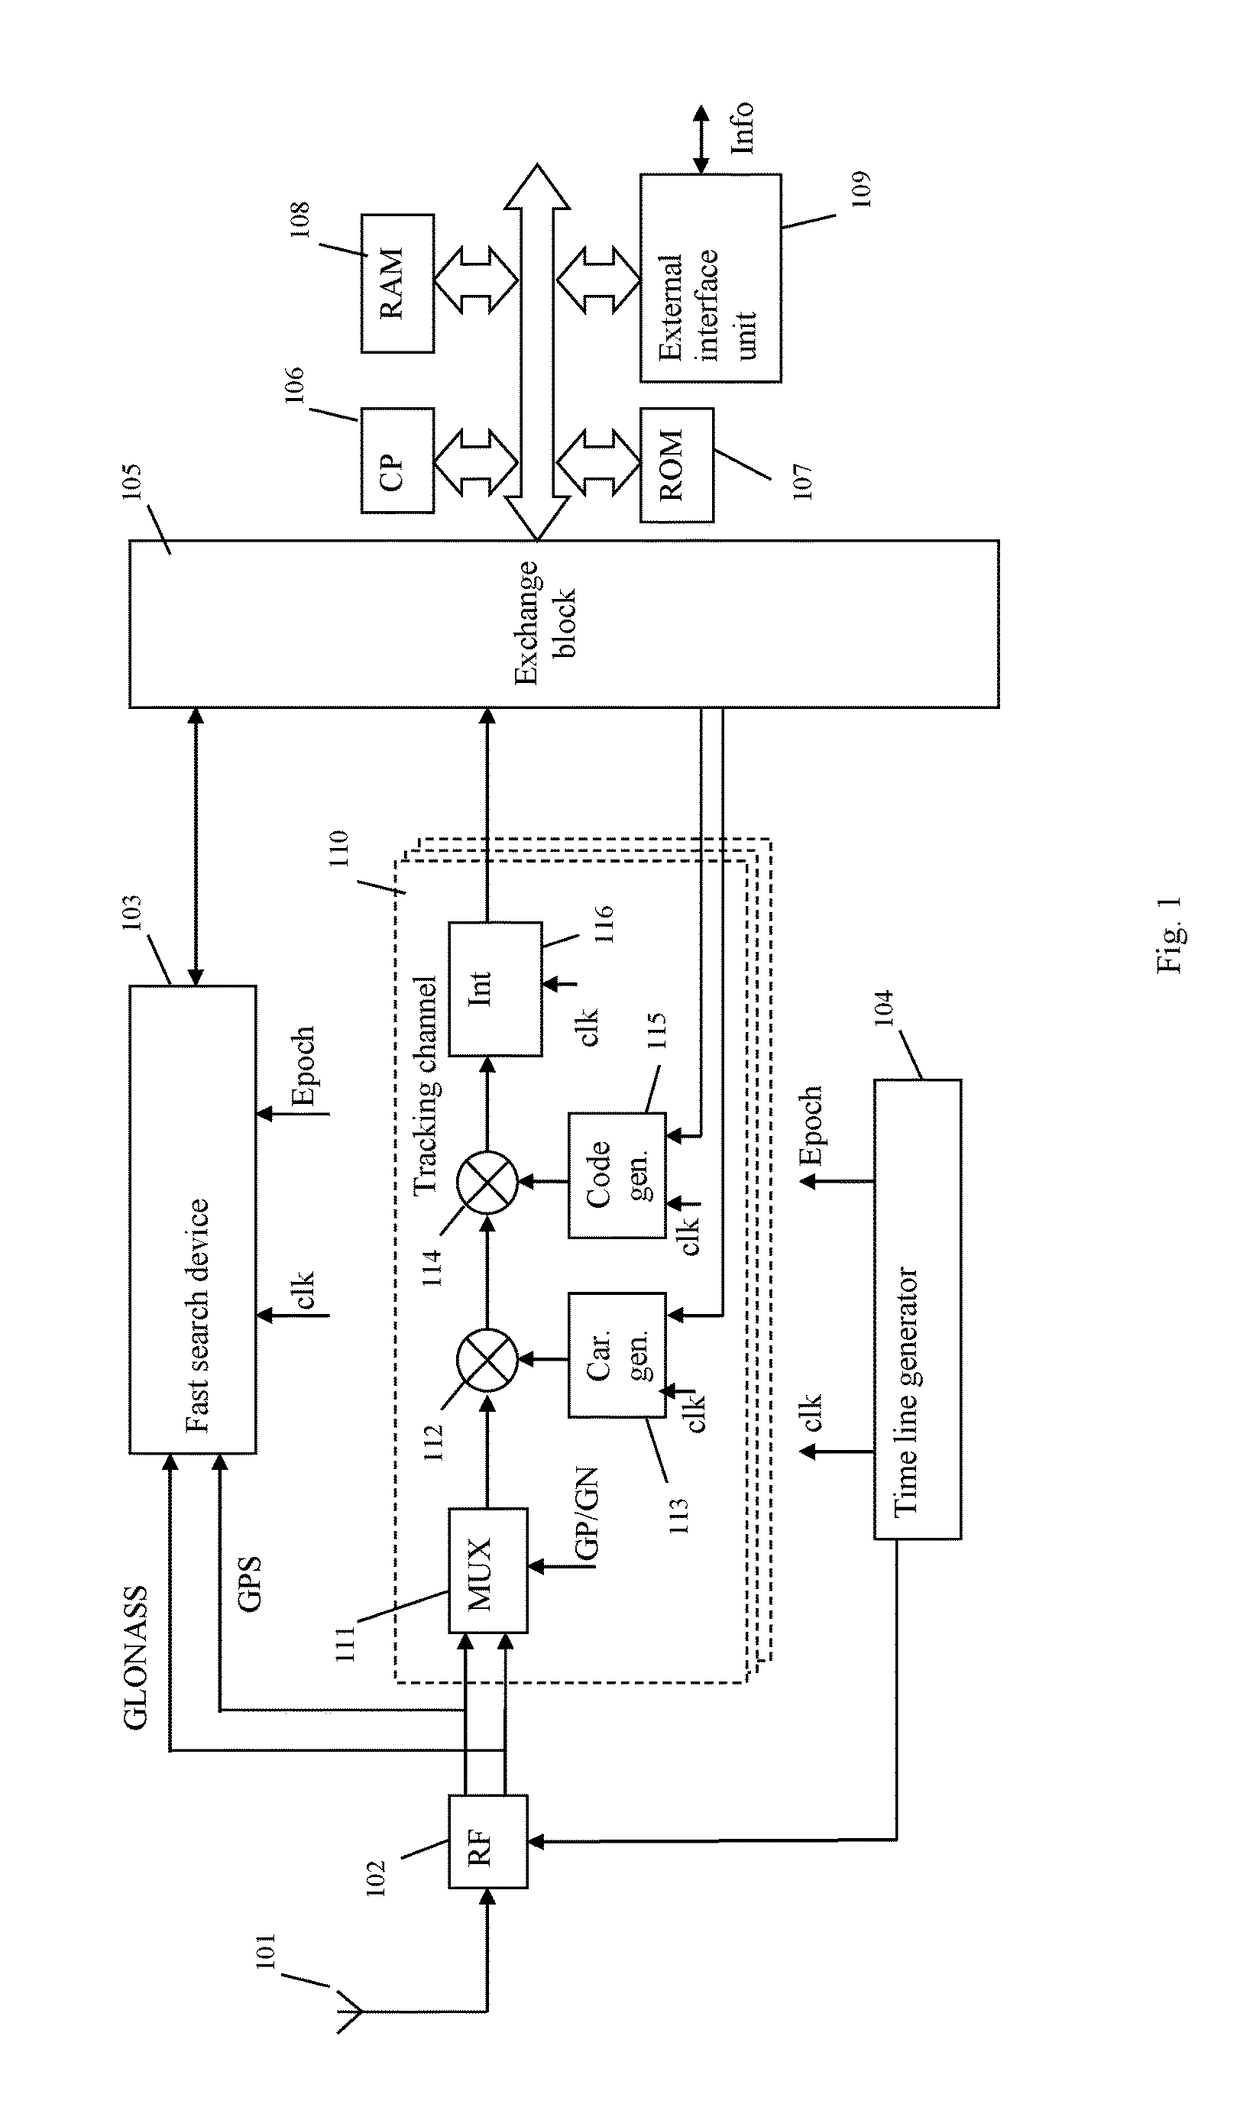 Simultaneous signal reception device of different satellite navigation systems